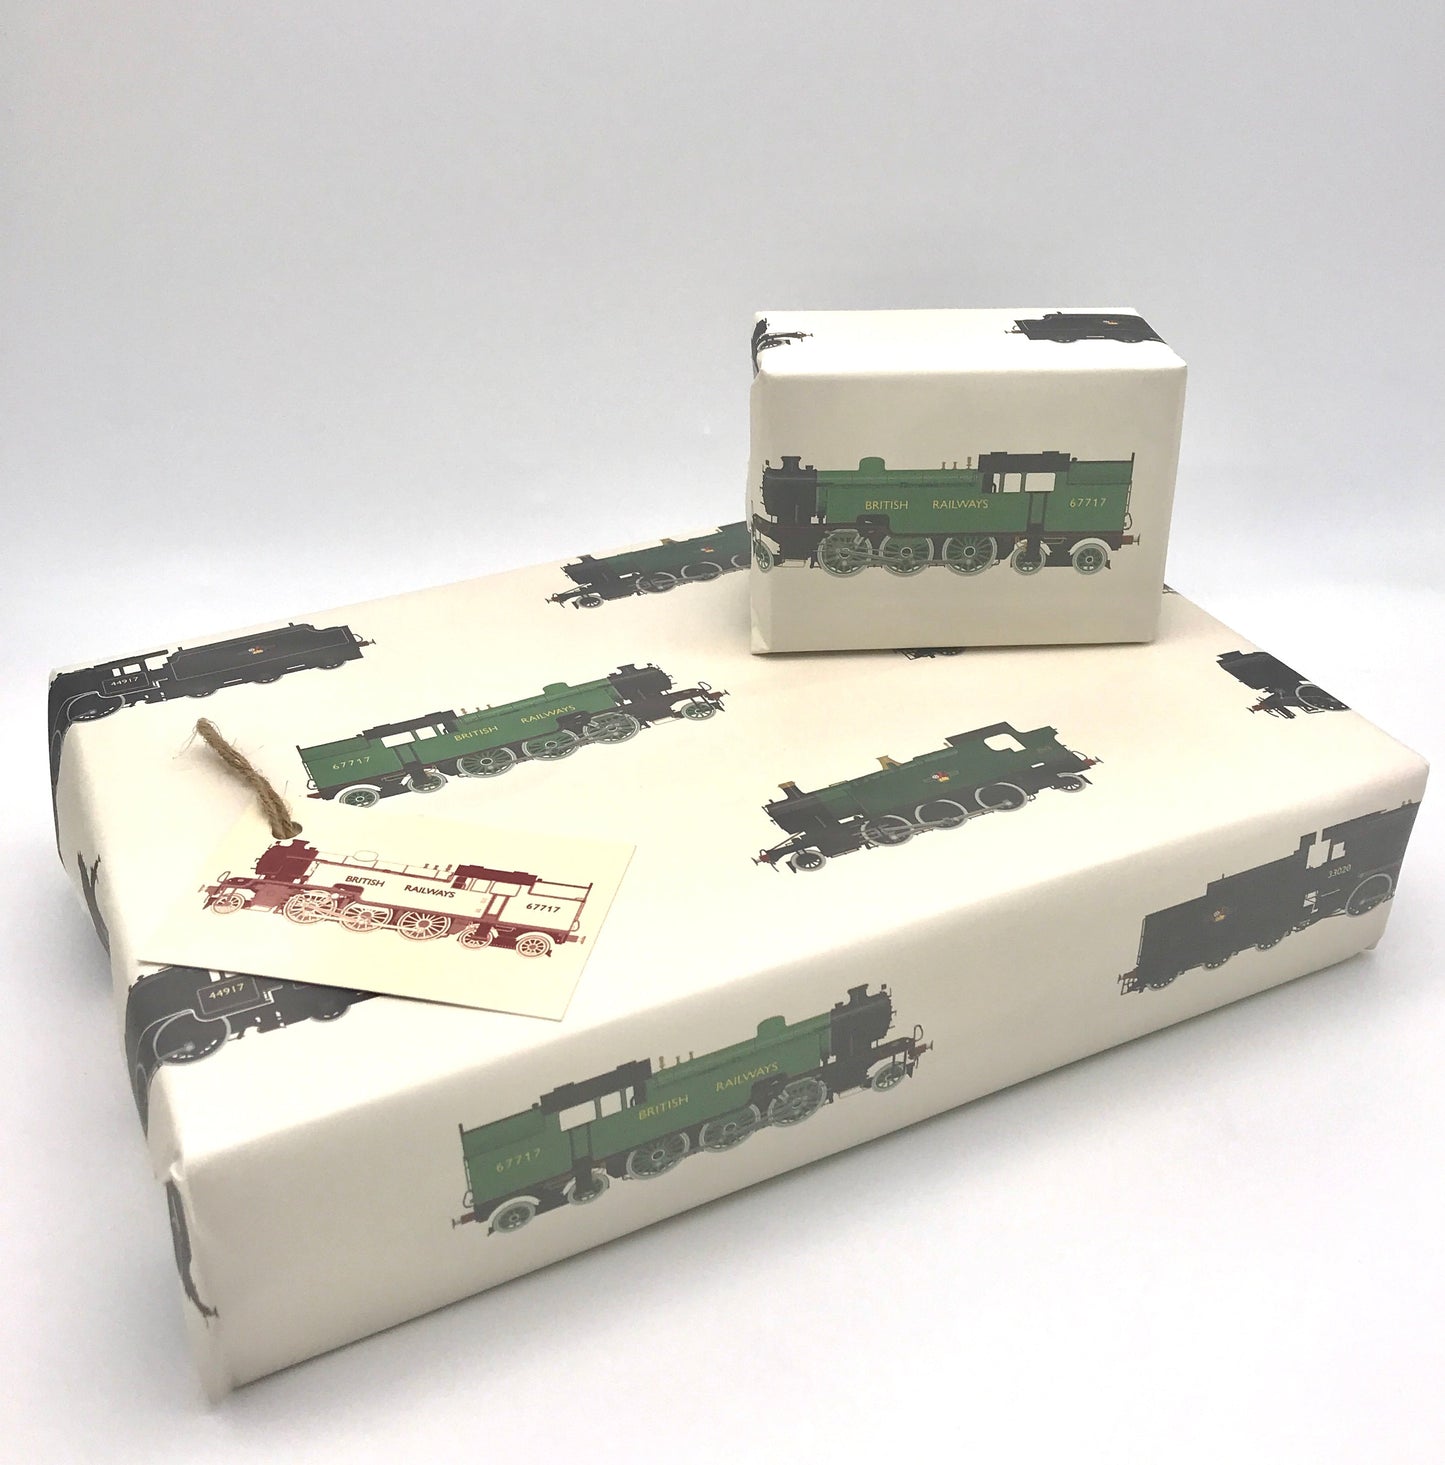 Classic British Steam Trains Gift Wrap and Matching Gift Tag - Rolled